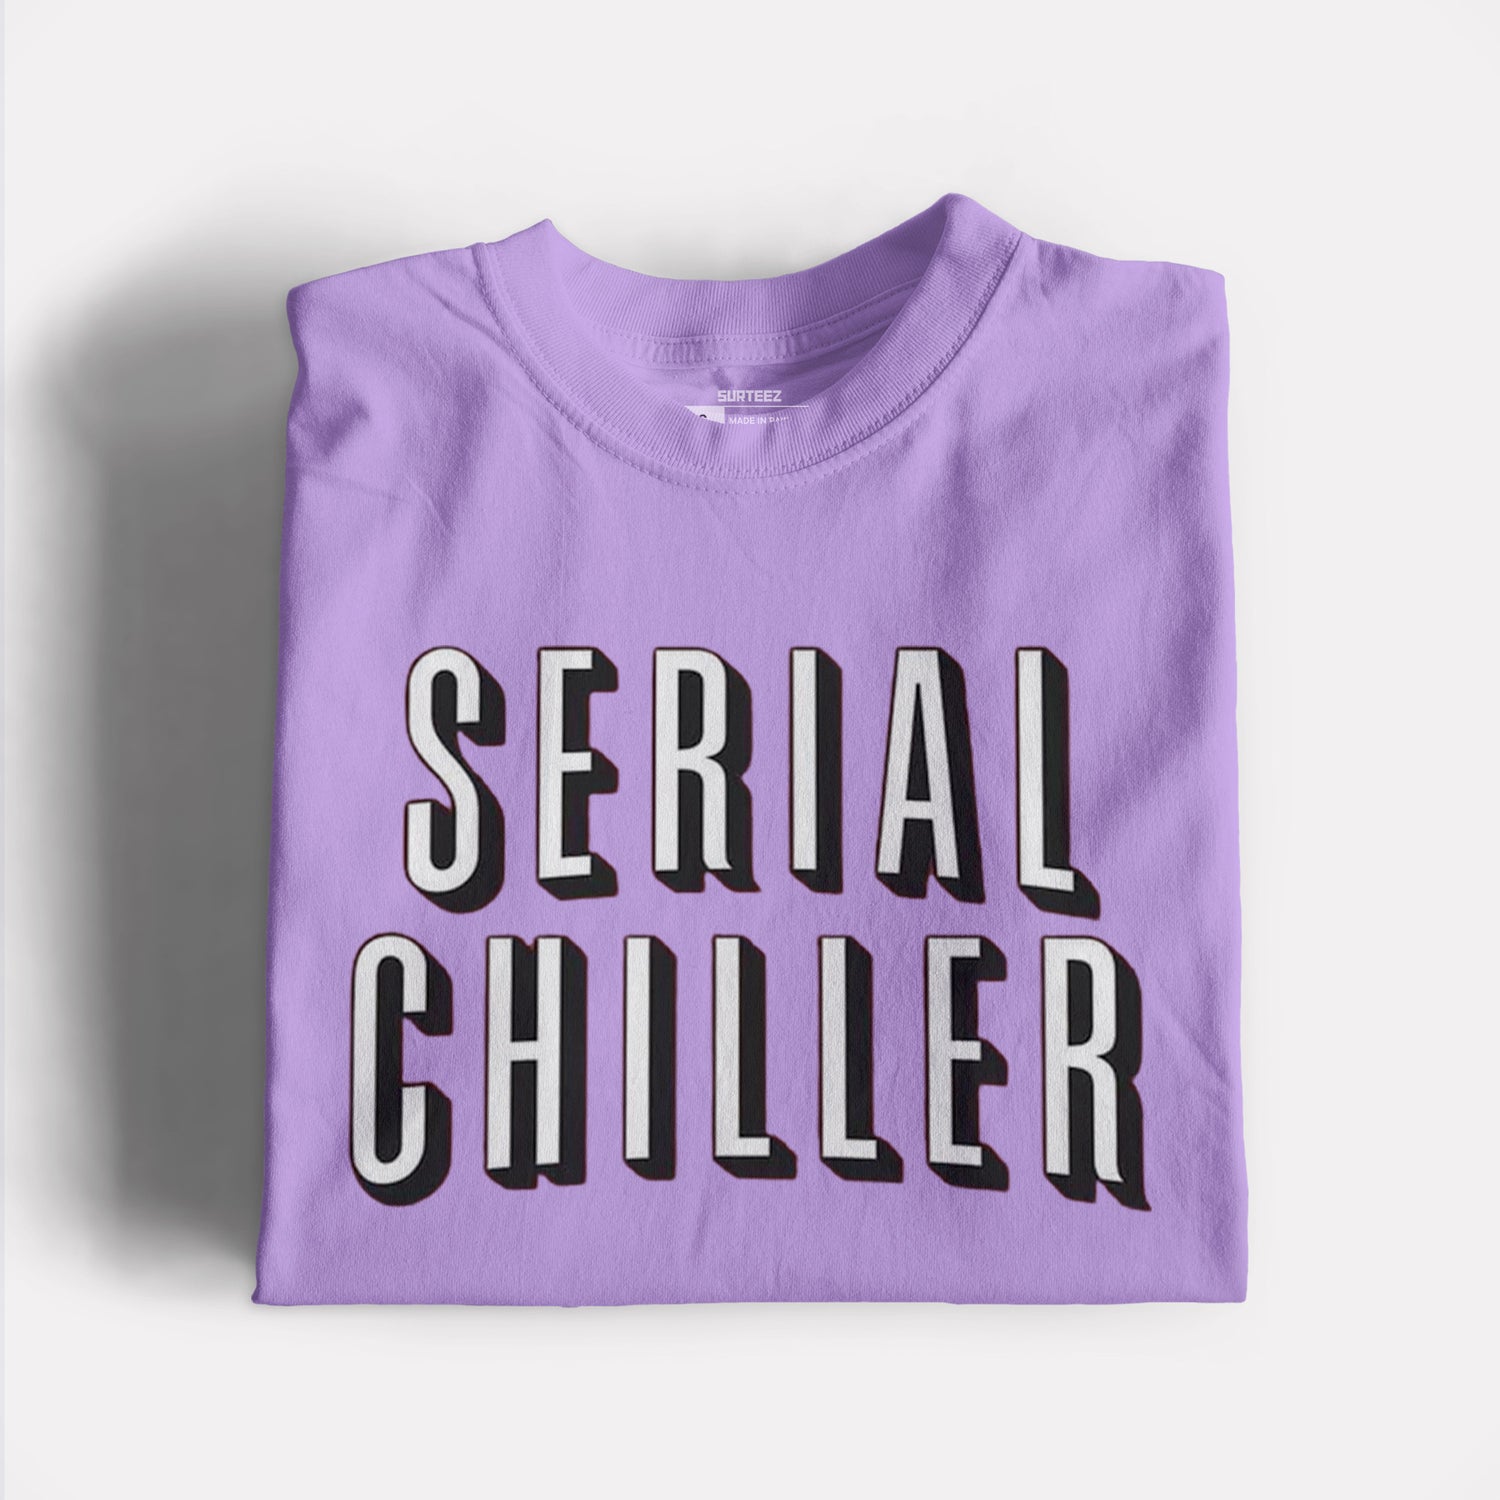 Serial Chiller Graphic Tee